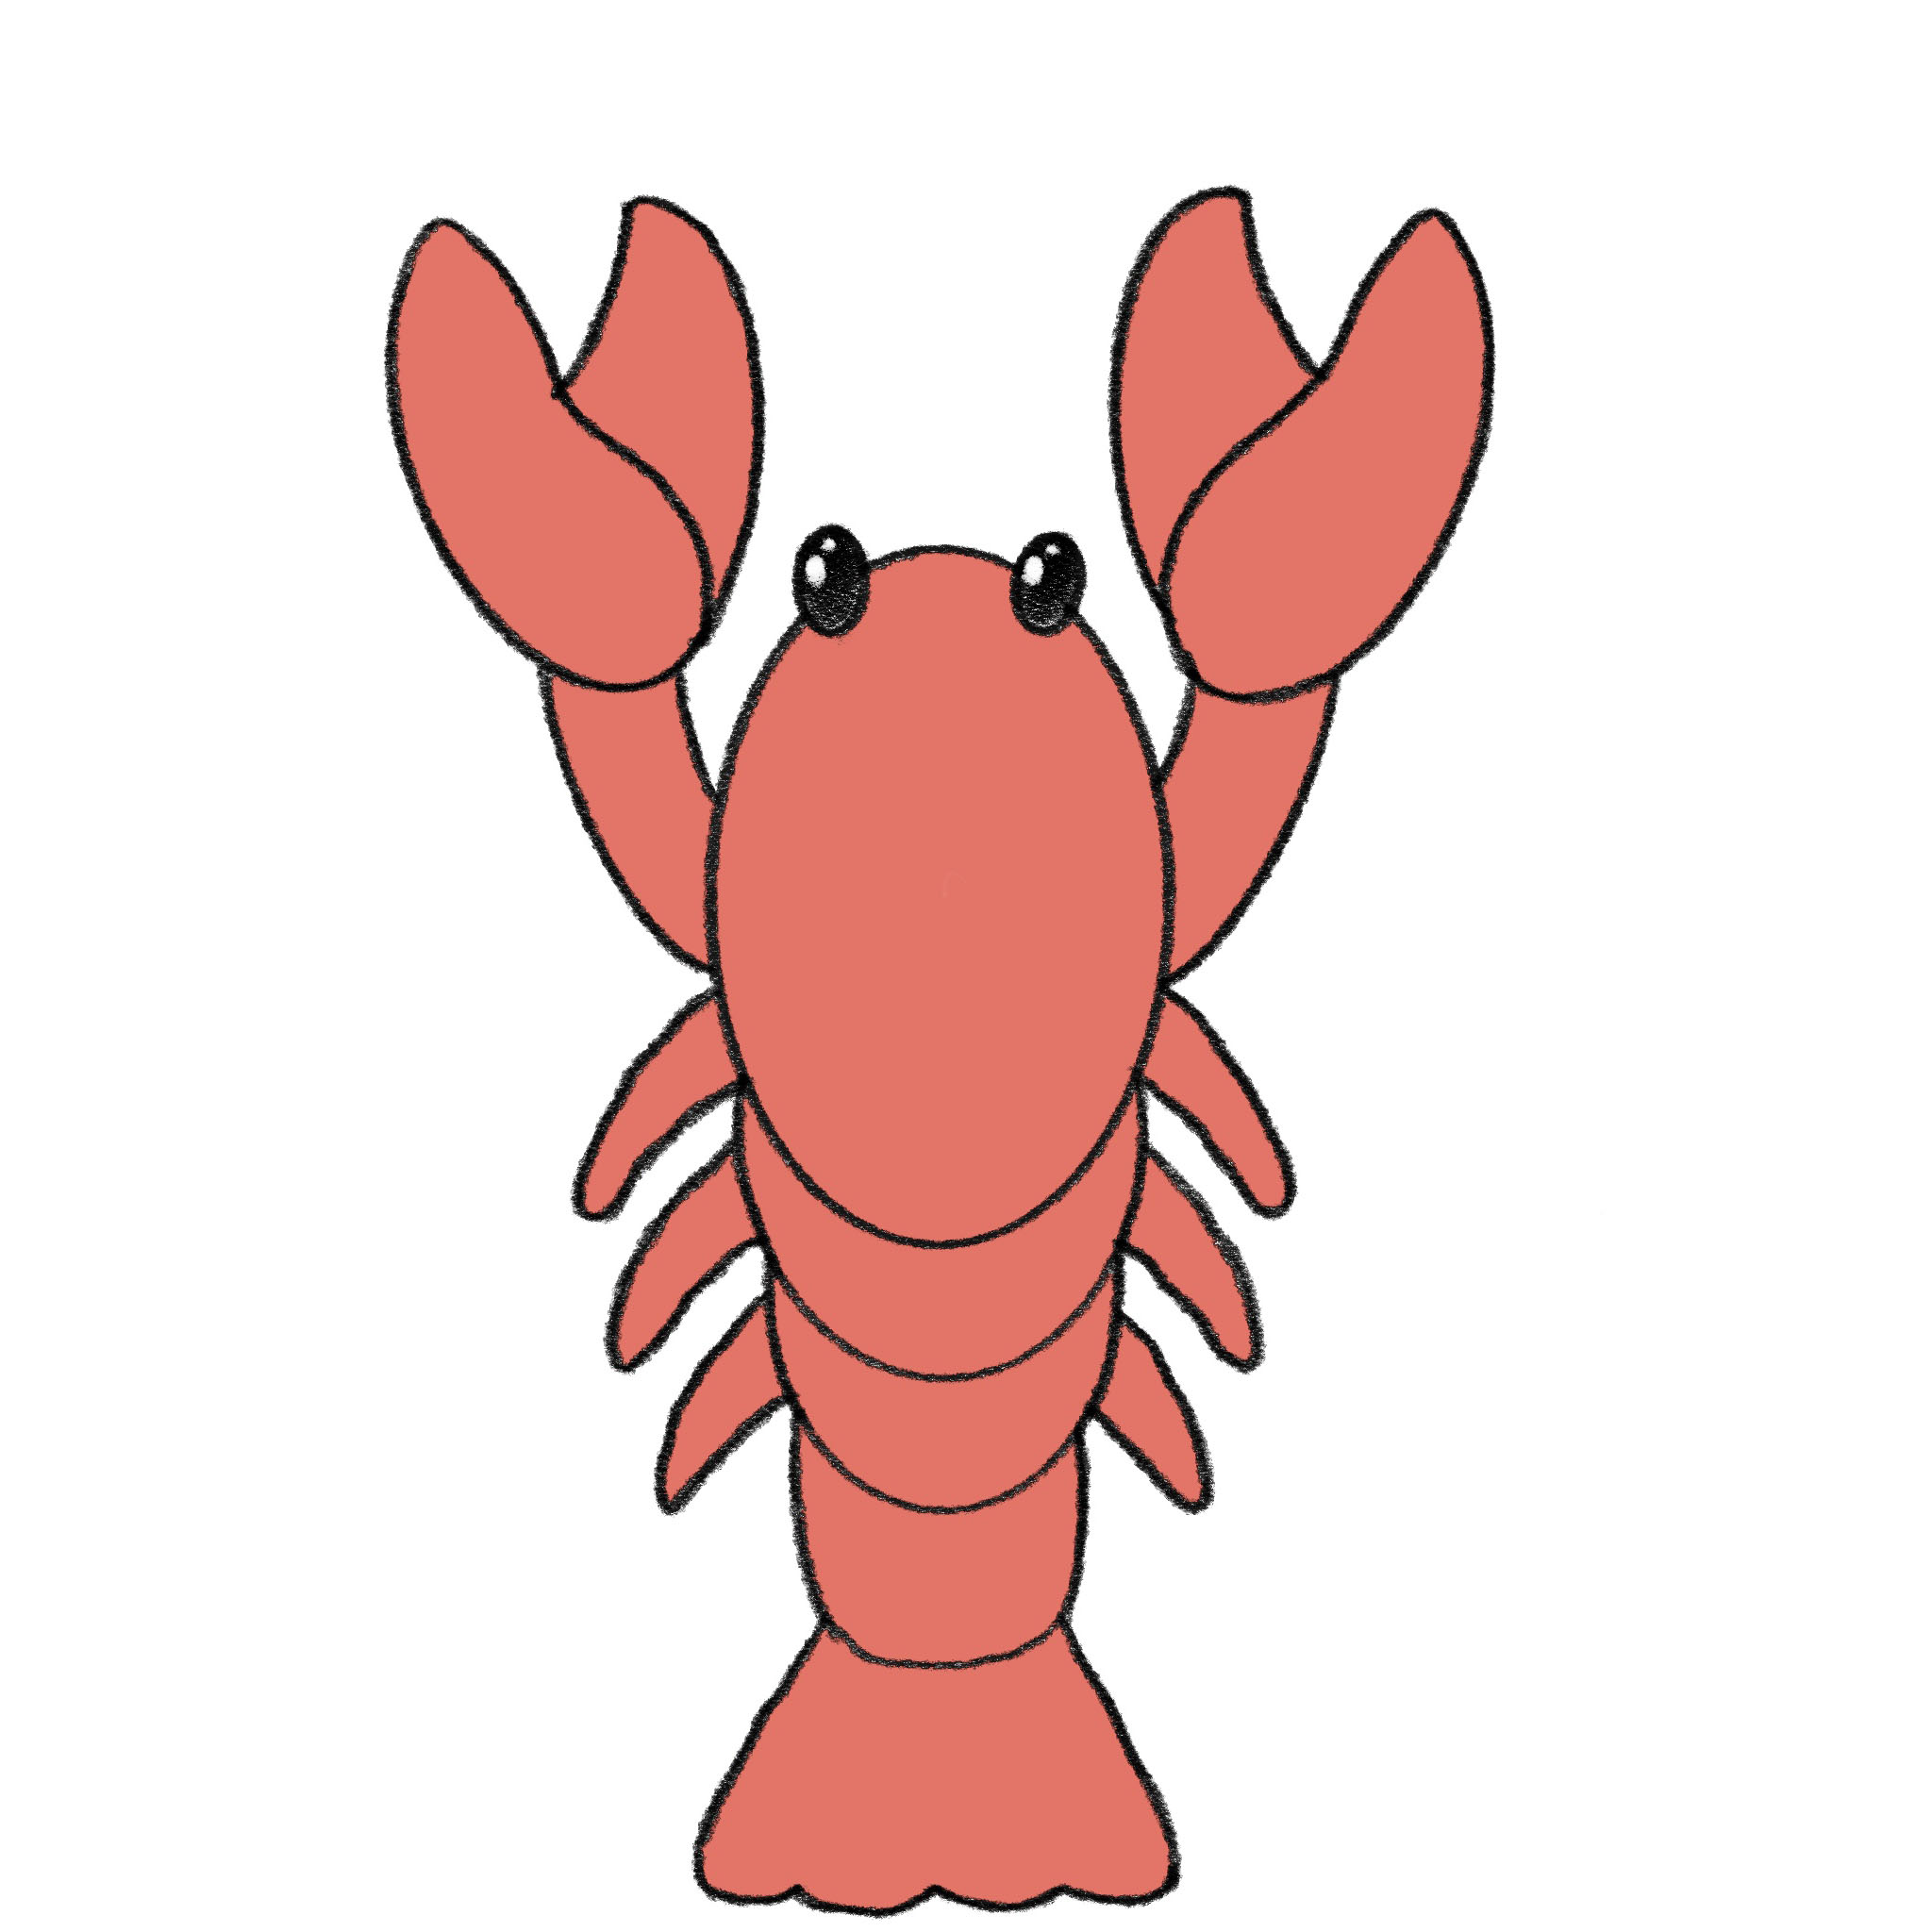 How to Draw a Lobster - Easy Drawing Tutorial For Kids